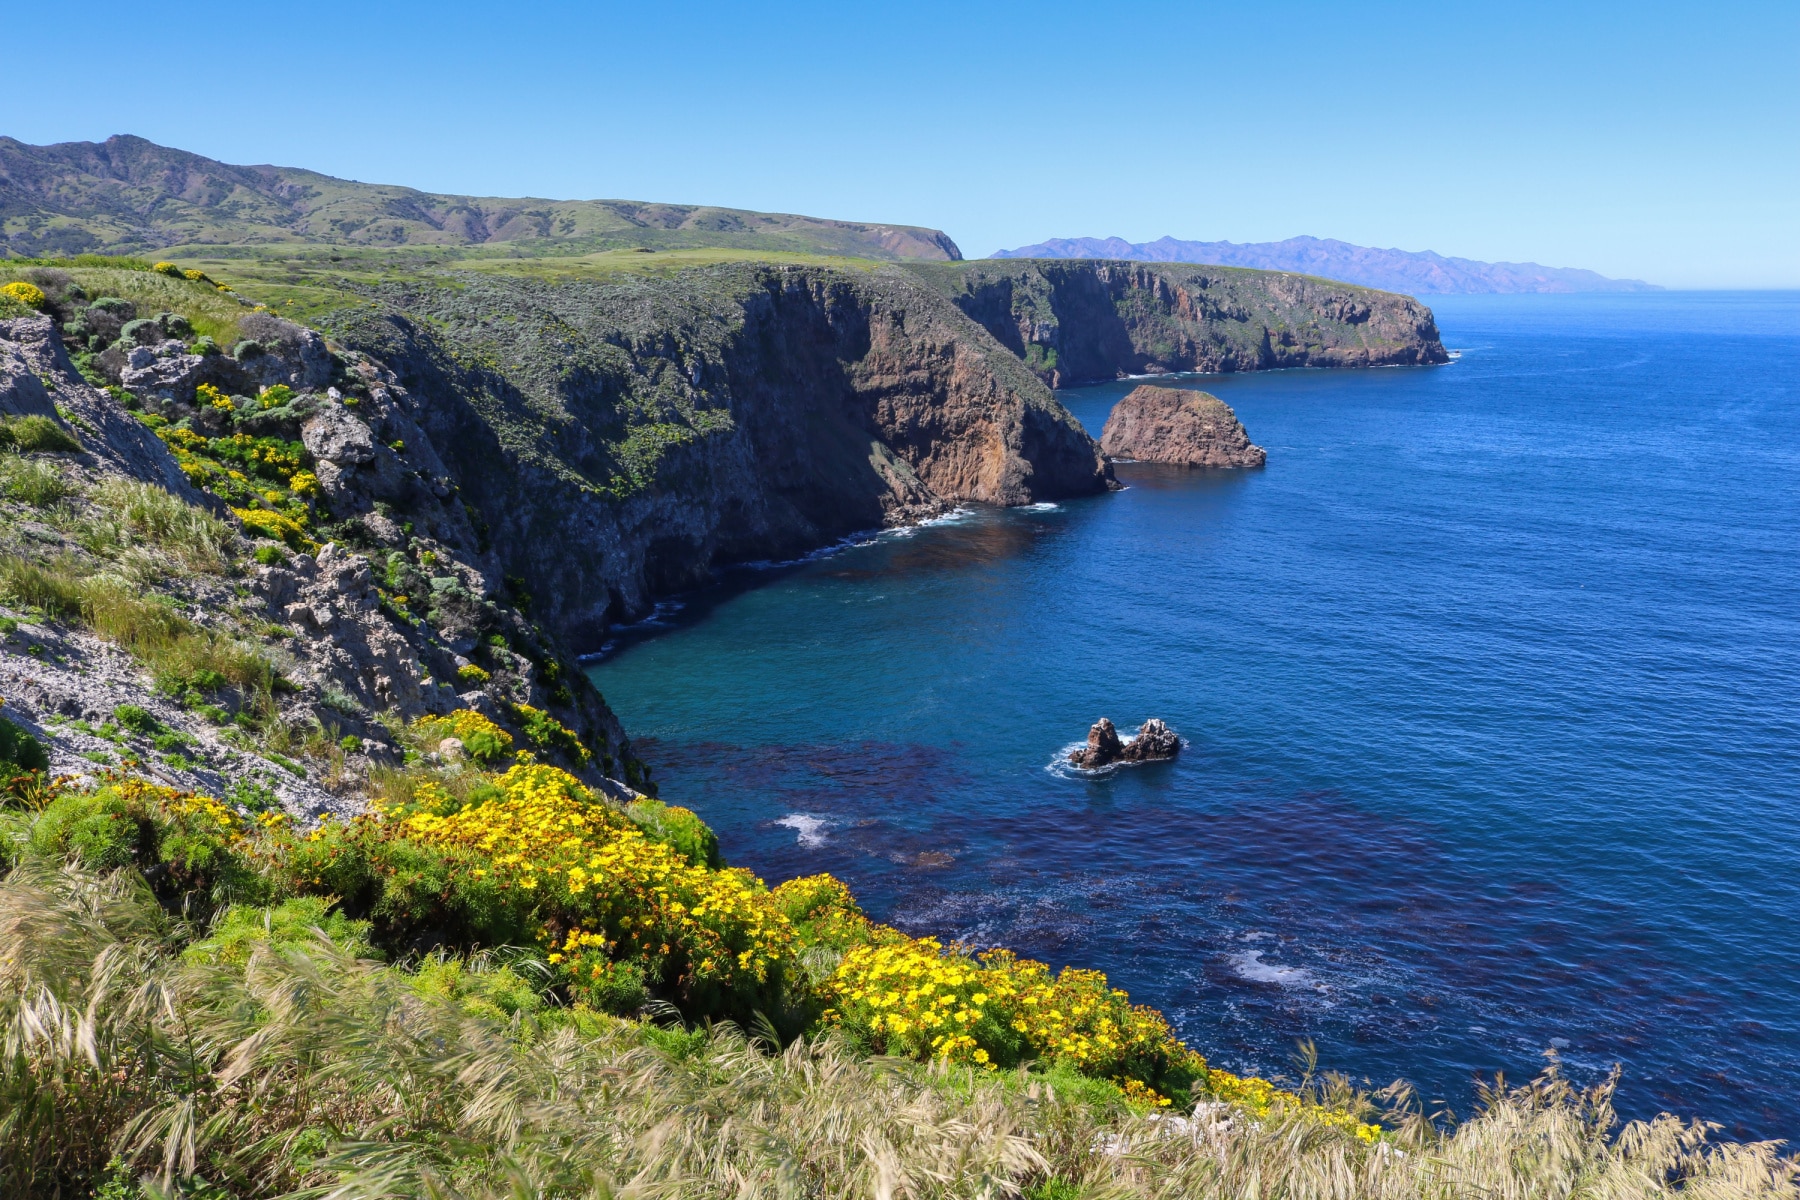 Santa Cruz Island is one of the most popular places for Channel Islands National Park things to do.